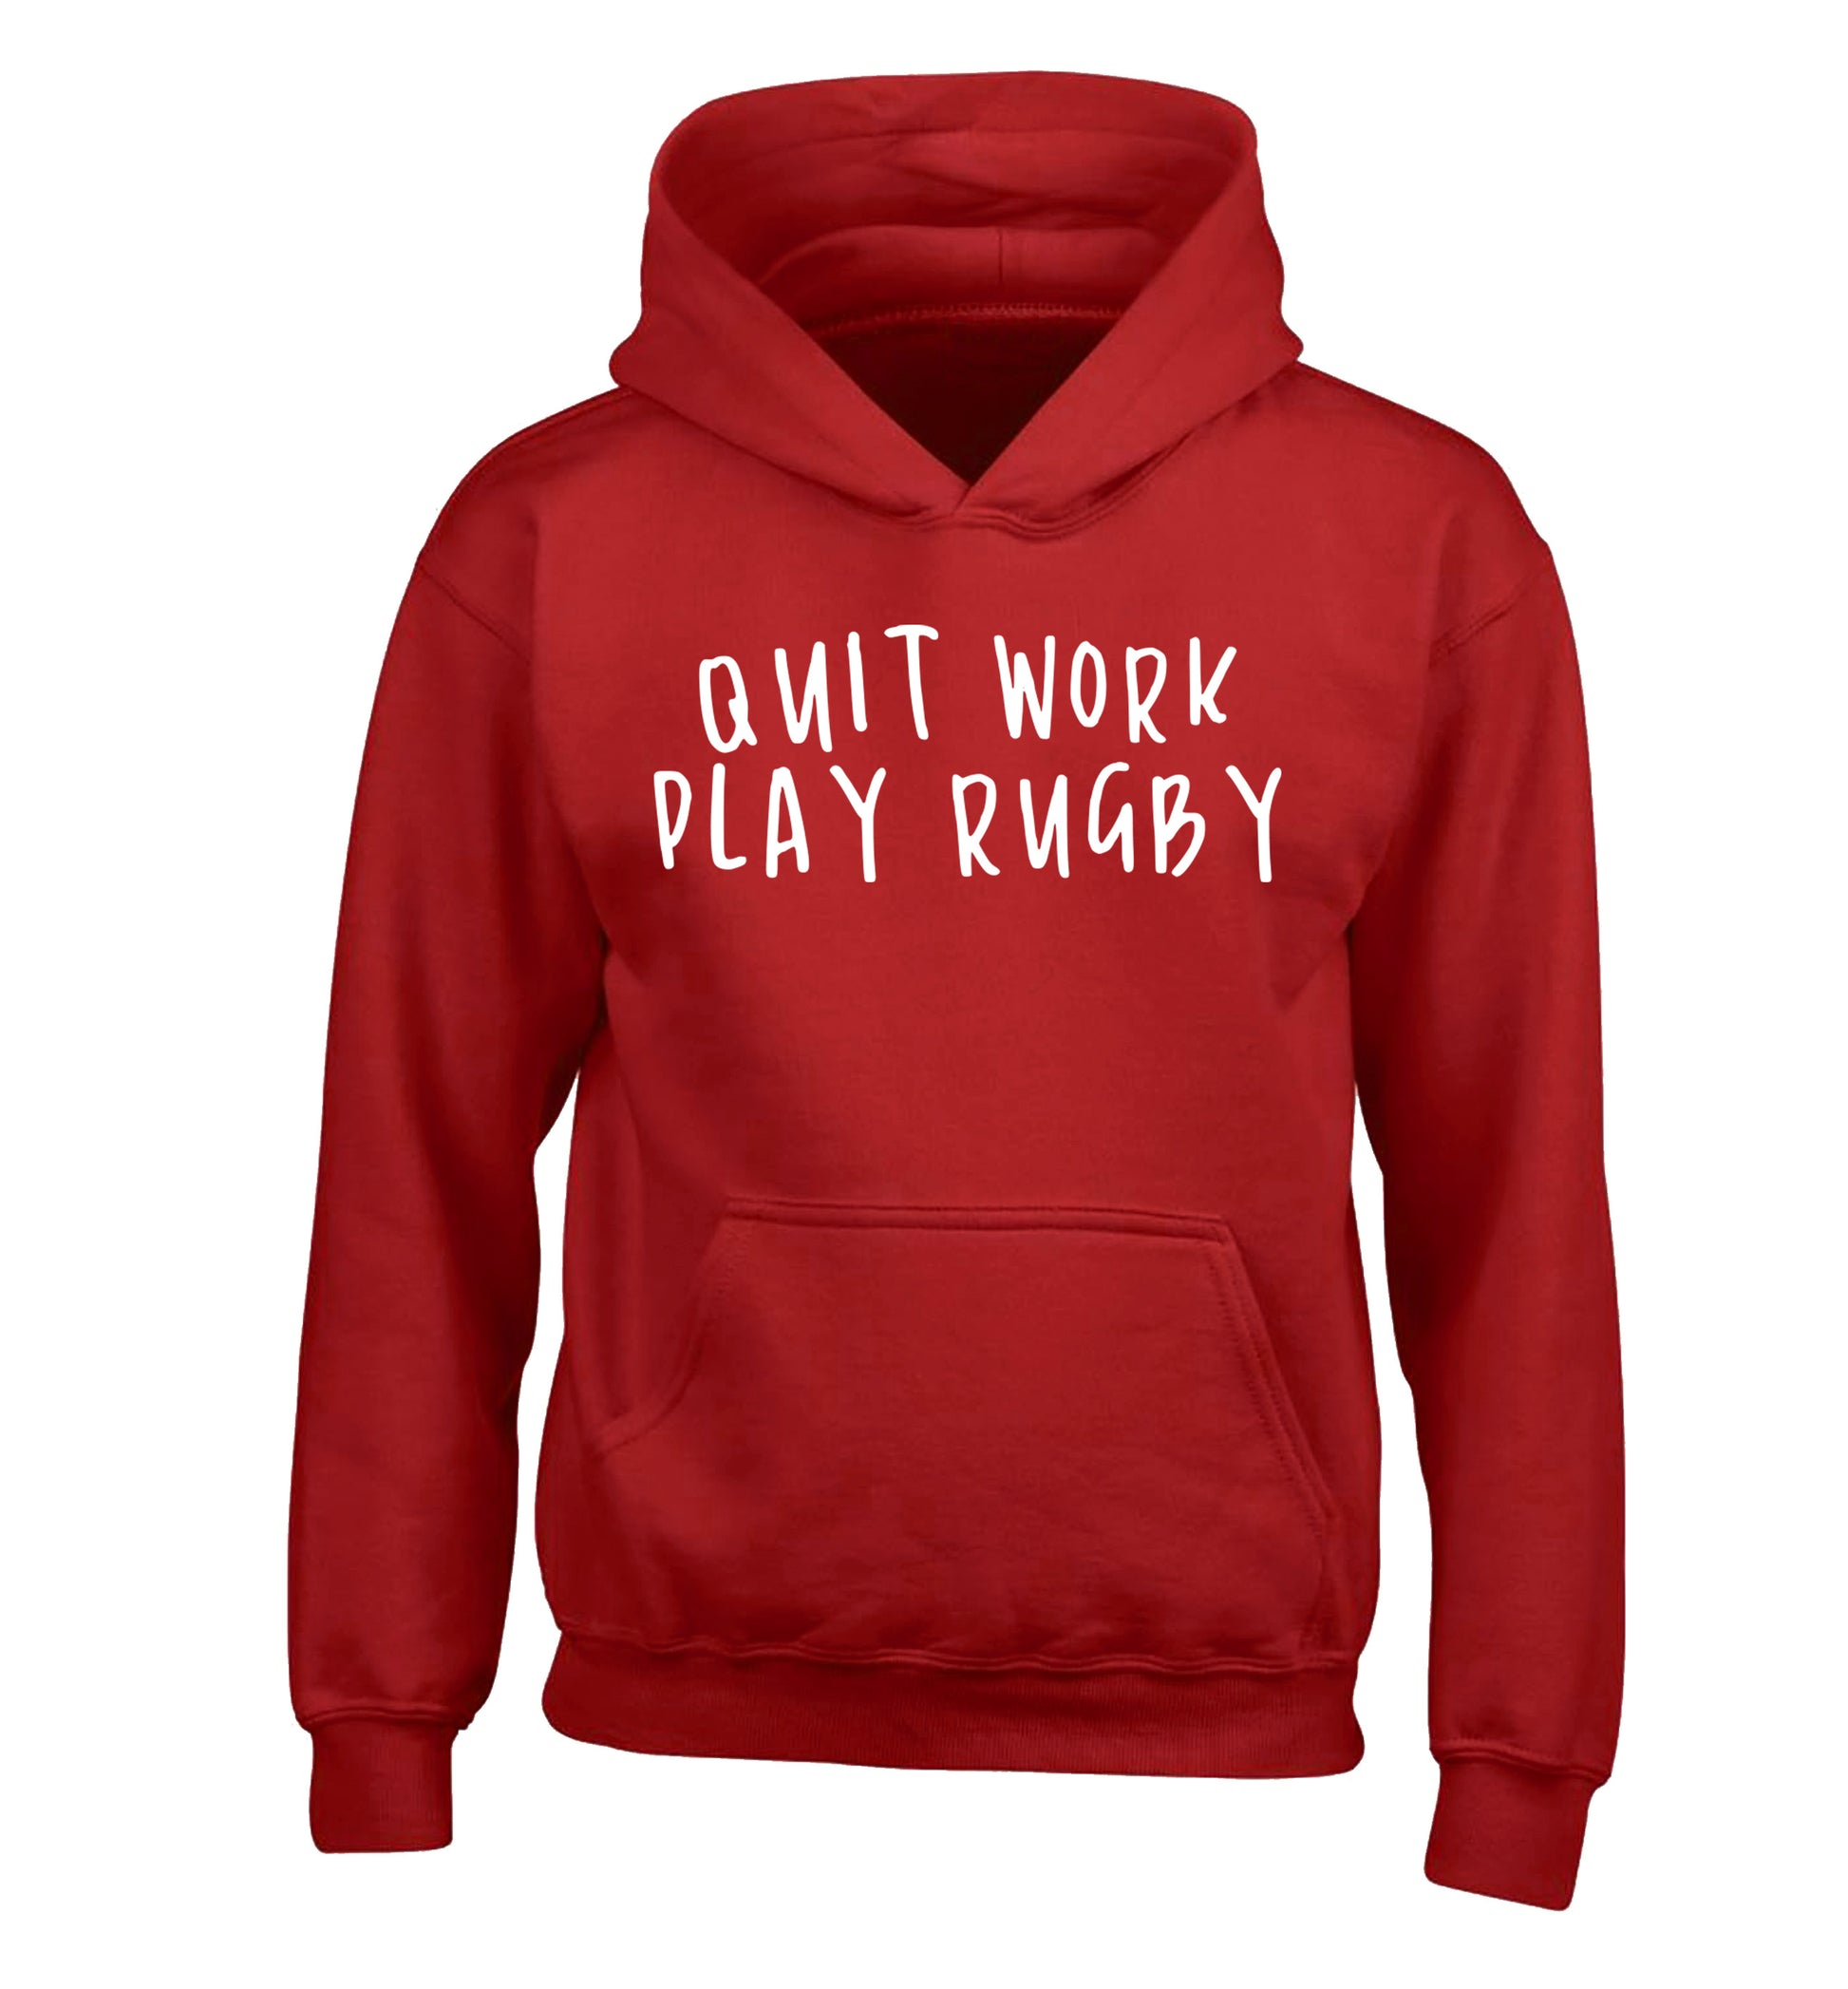 Quit work play rugby children's red hoodie 12-13 Years